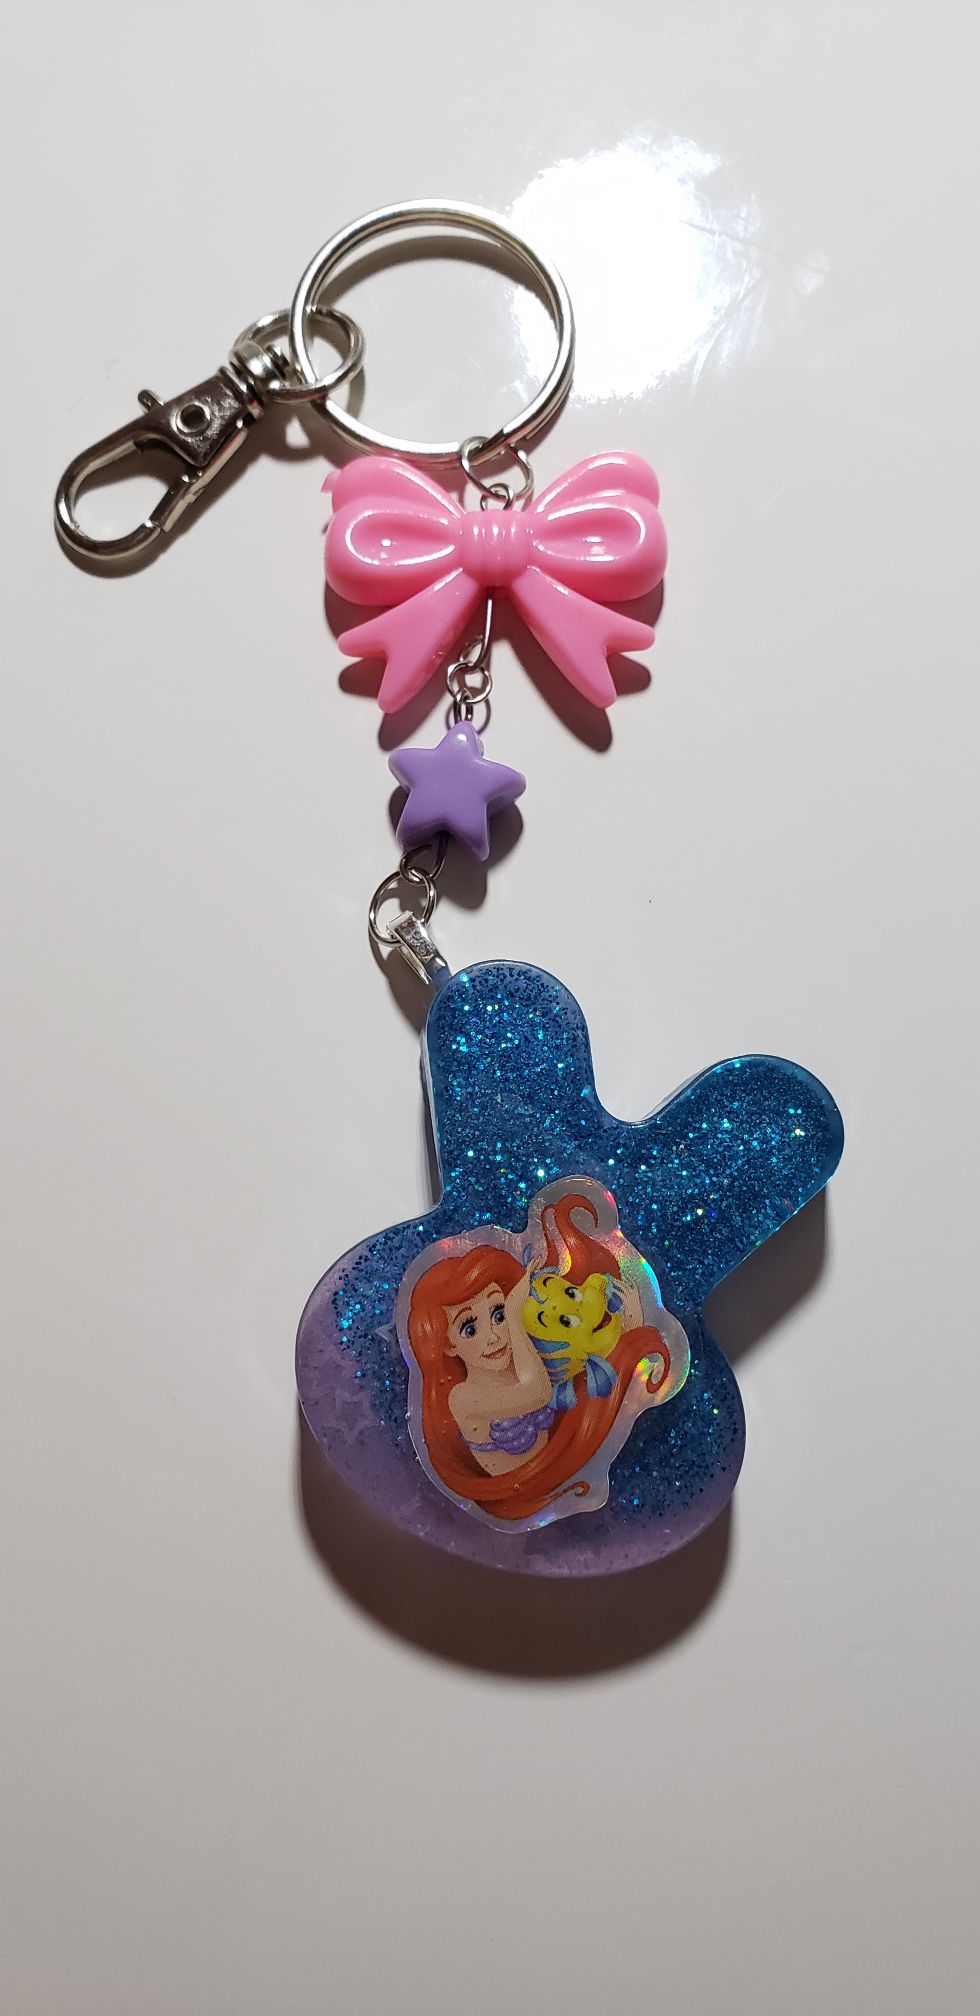 Disney charms beauty and the beast, the little mermaid